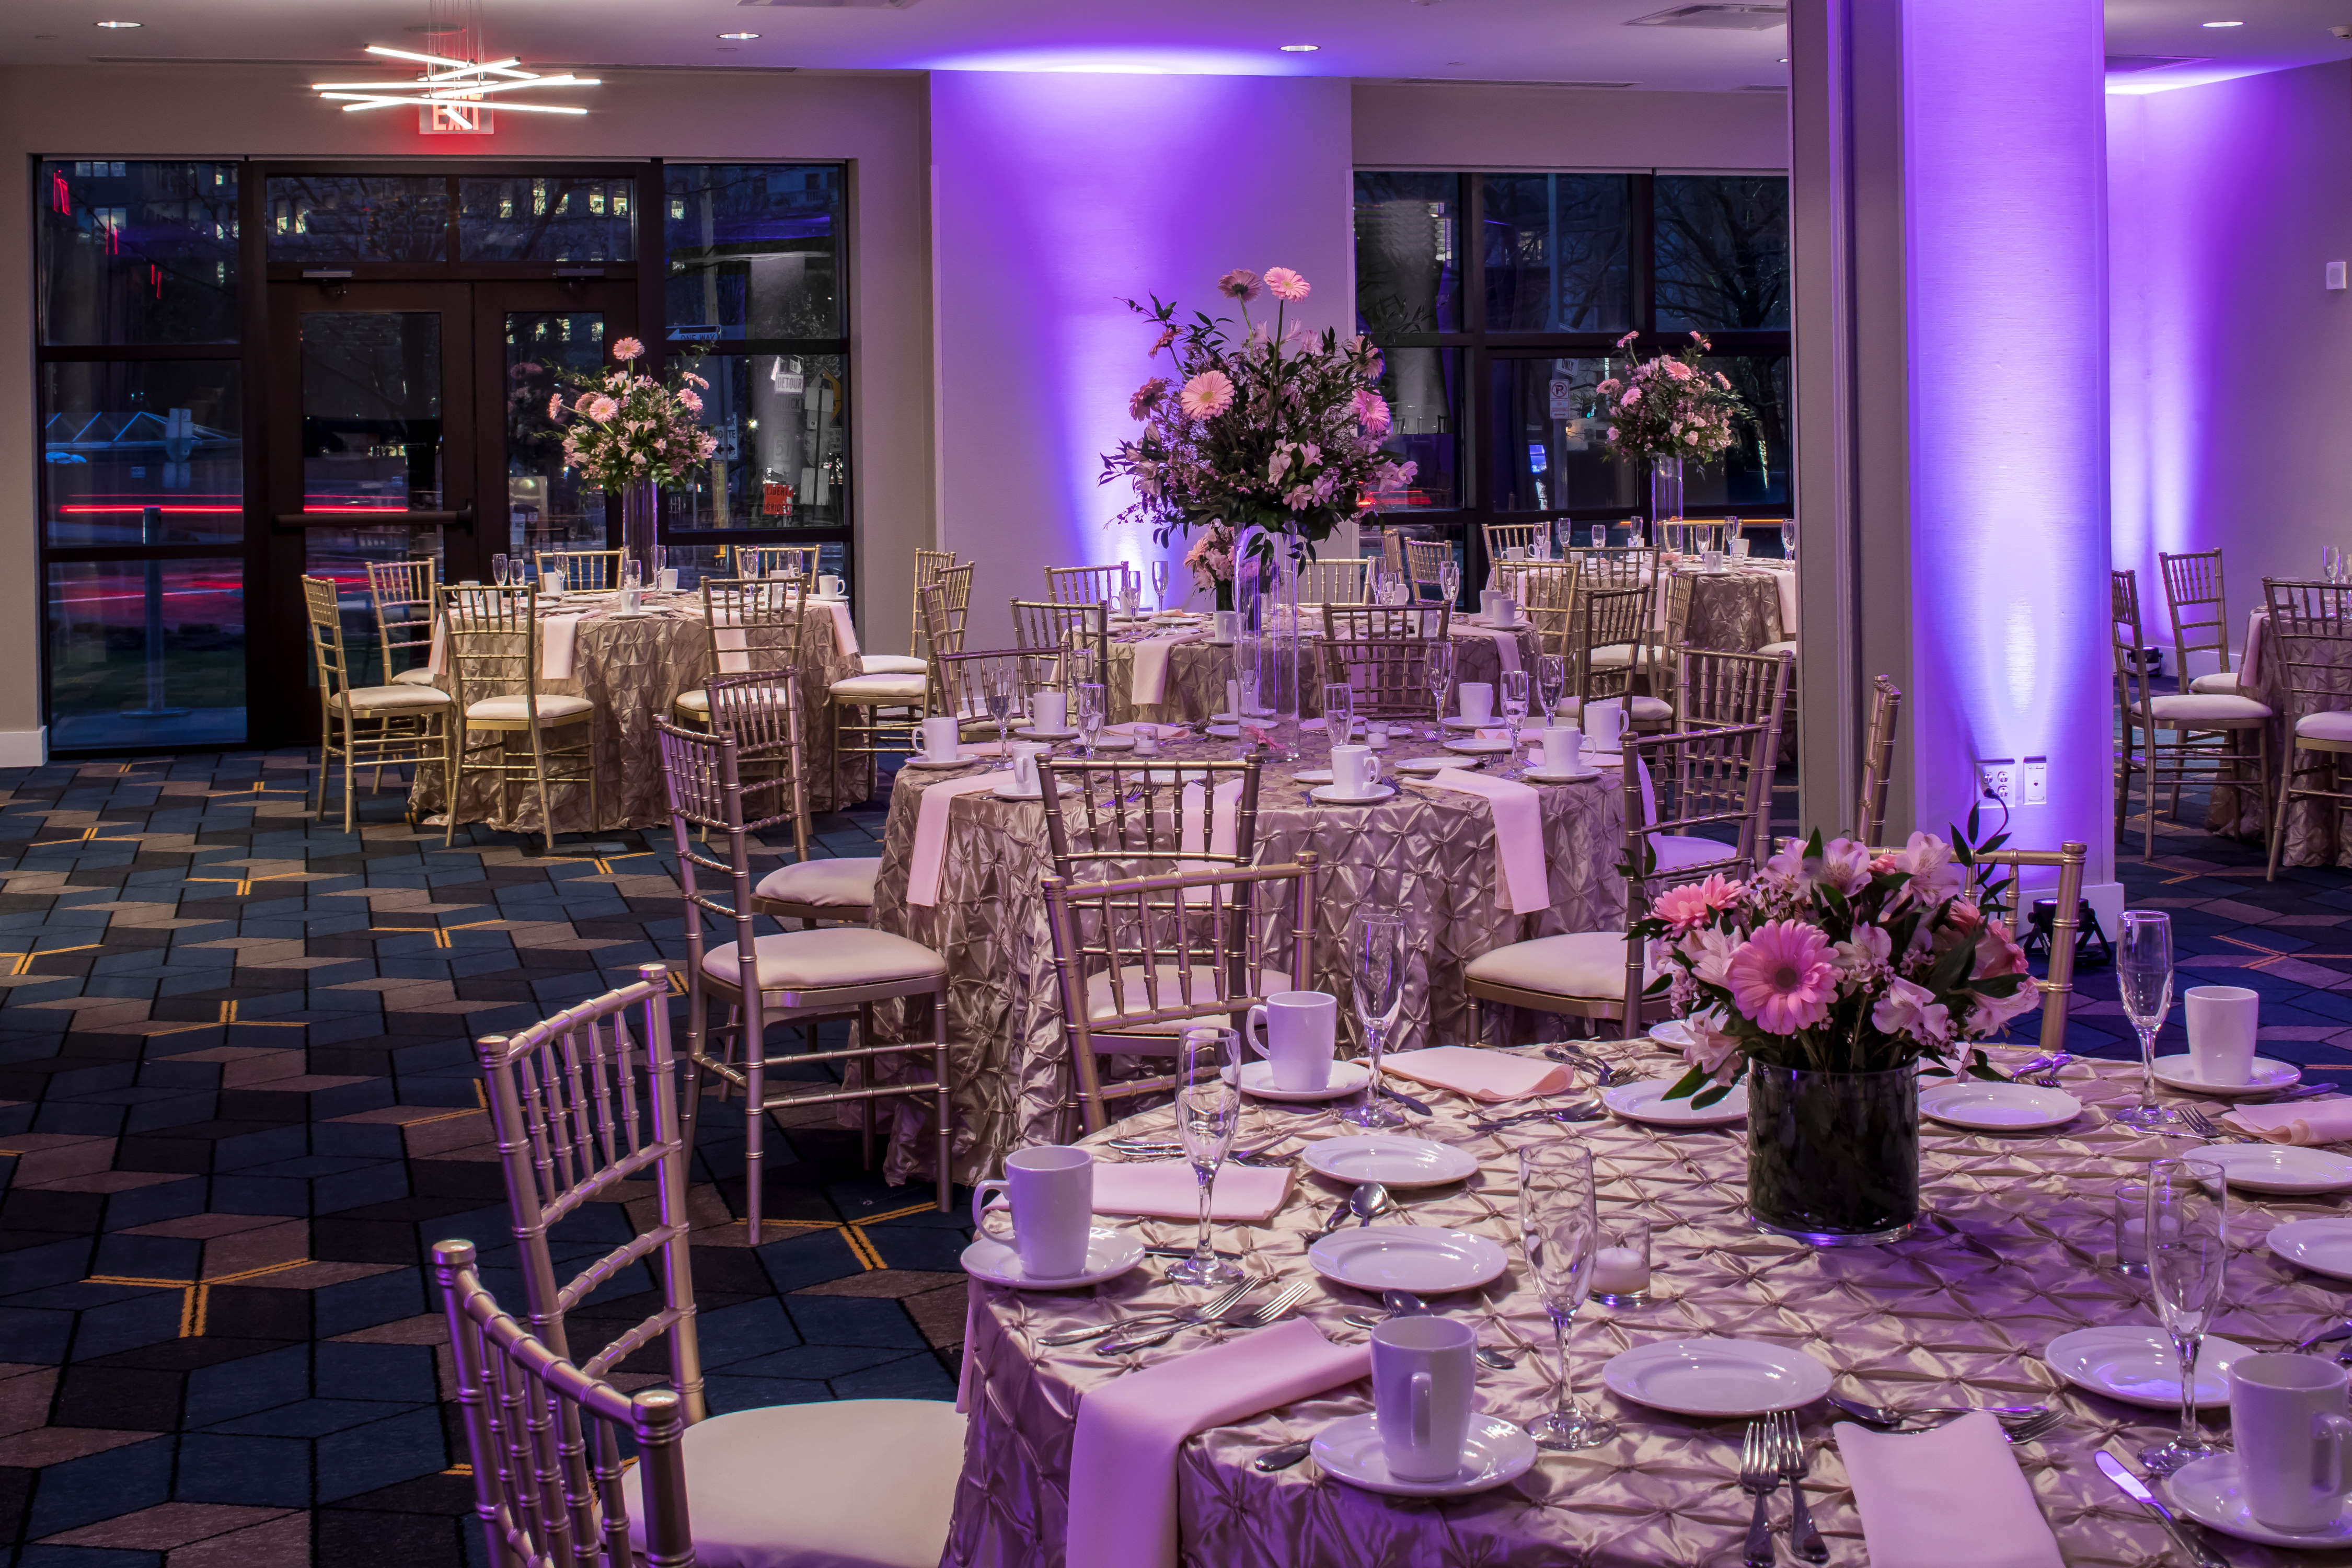 Ballroom With Purple Lighting, Place Settings, Flowers, Drinking Glasses, White Napkins, and Decorative Linens on Round Tables, Chairs, Windows With Sheer Drapes, and Glass Entry Doors